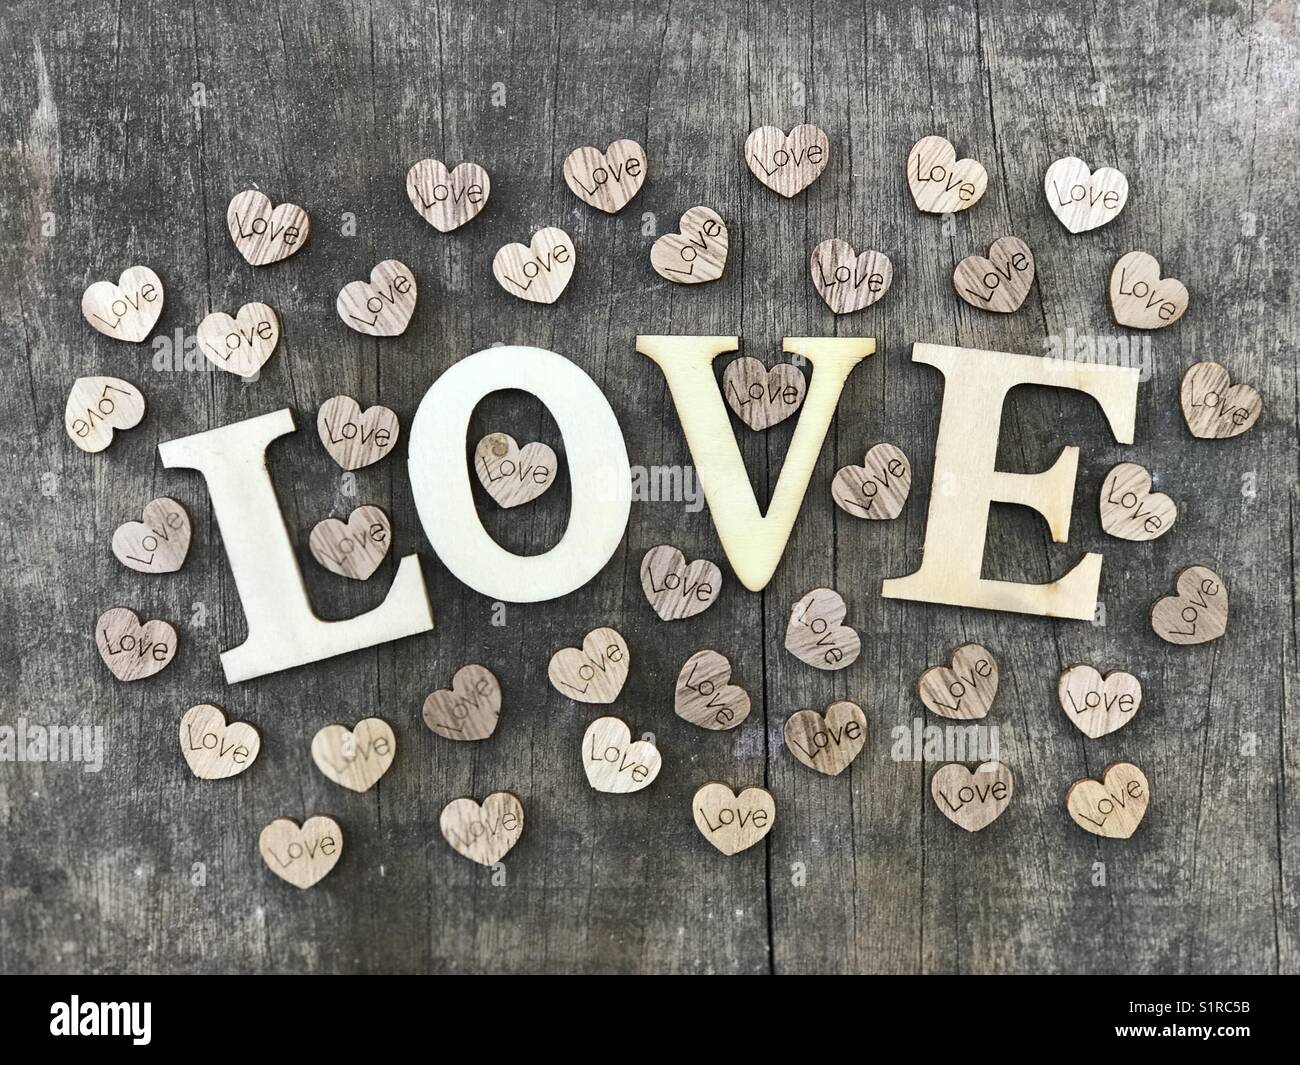 Love text with wooden letters and many little wooden hearts Stock Photo